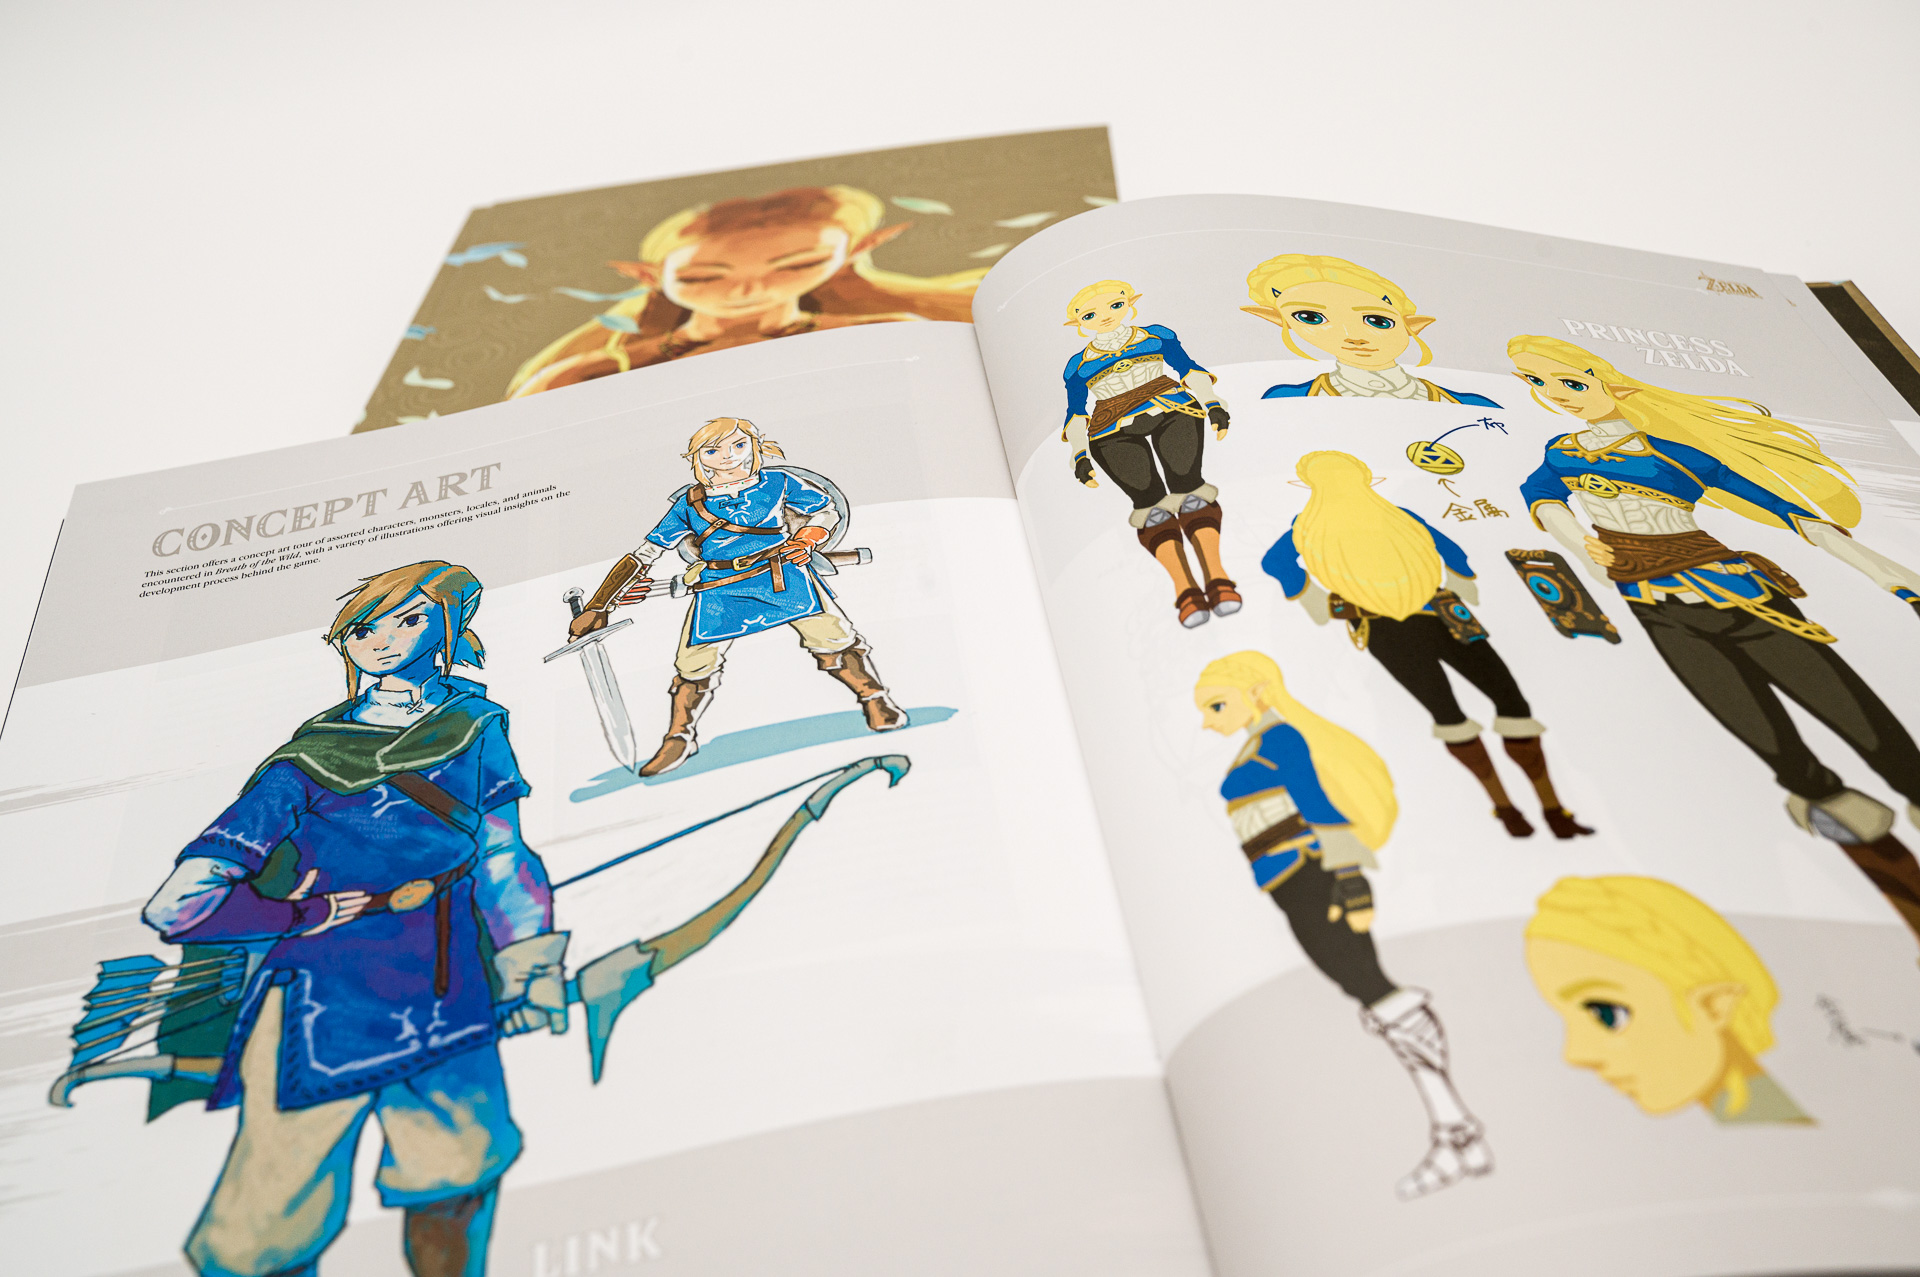 The Legend of Zelda: Breath of the wild - Collector's Edition (game guide)